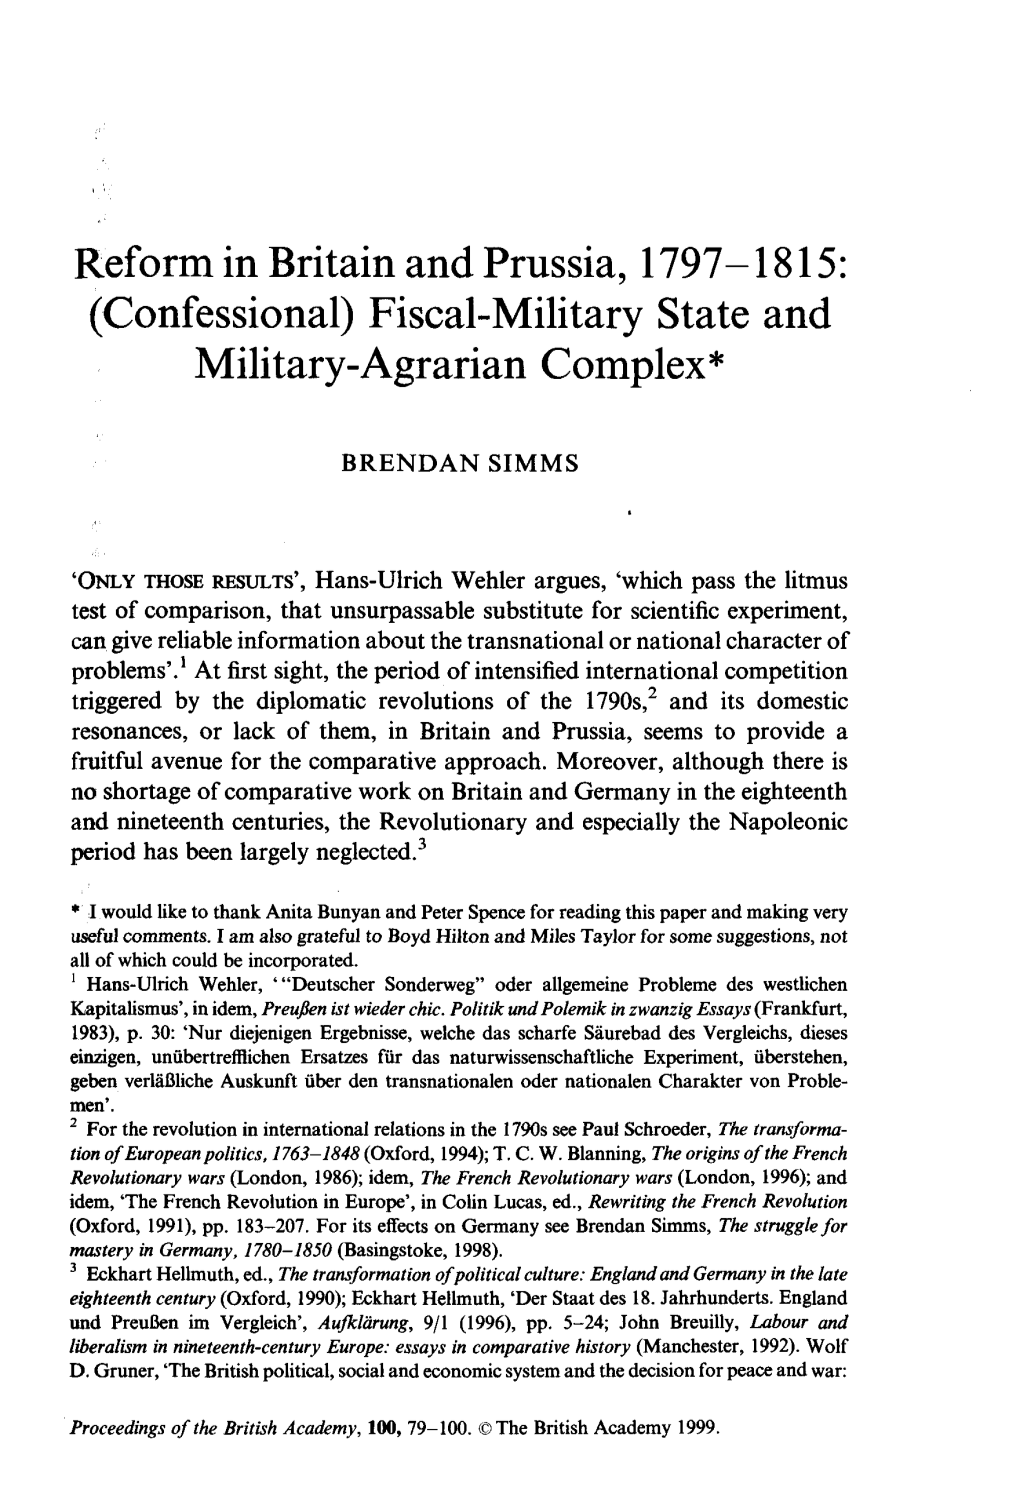 Reform in Britain and Prussia, 1797- 18 15: (Confessional) Fiscal-Military State and Military-Agrarian Complex*